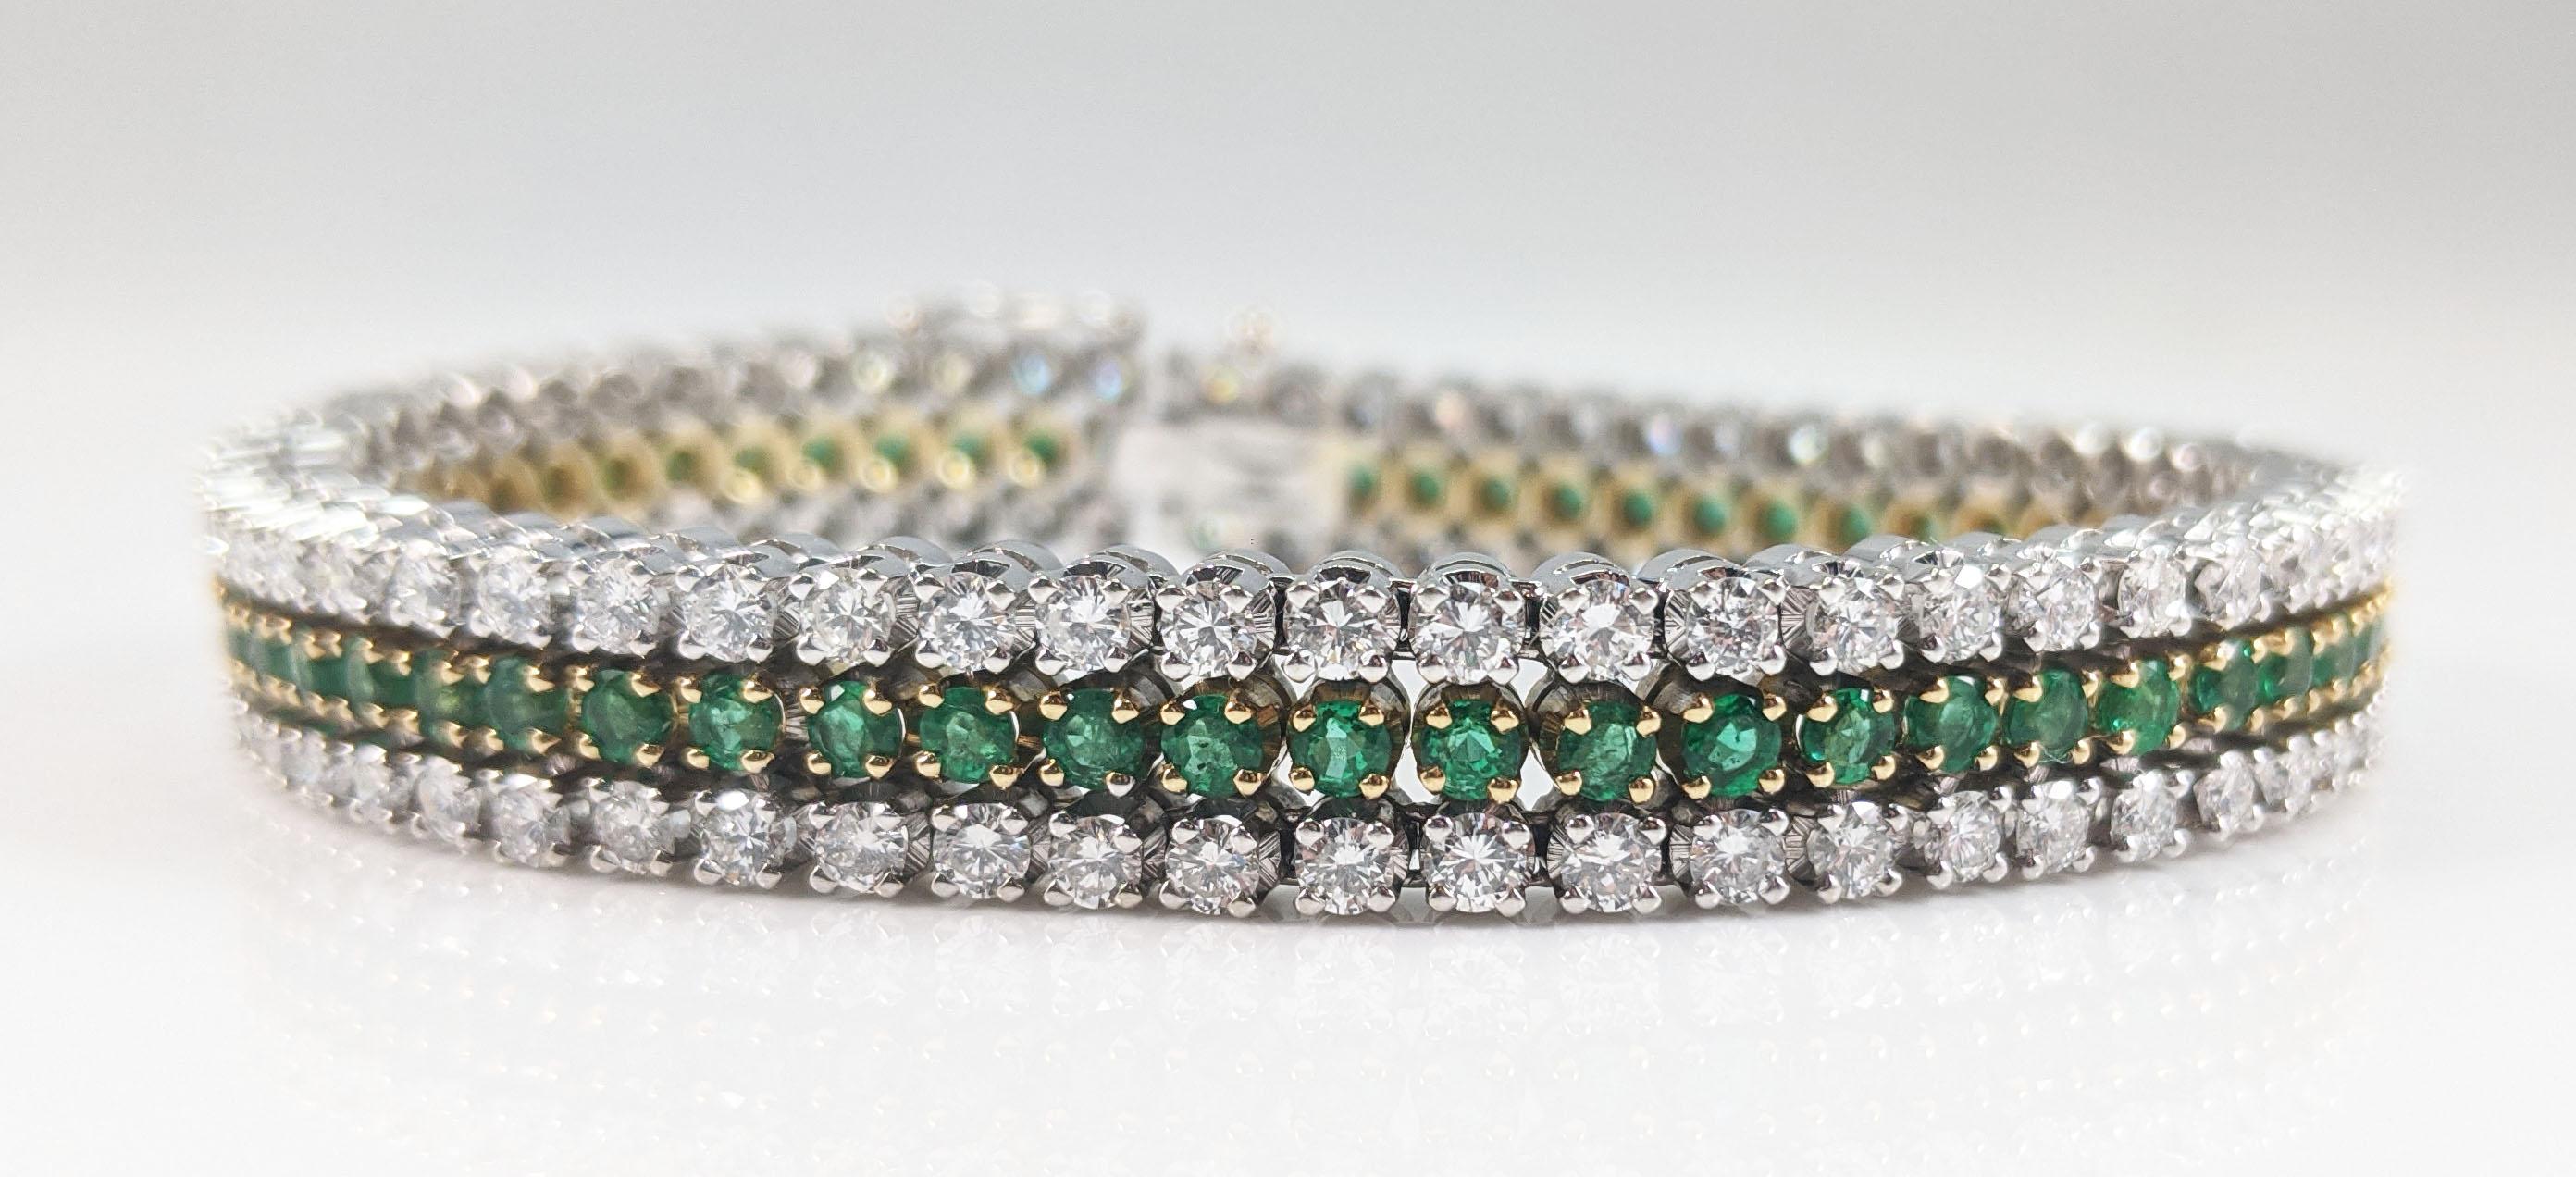 This is an absolutely breathtaking vintage bracelet featuring 18k yellow and white gold and a stunning array of brilliant white diamonds and bright green emeralds. The amazing combination of white and yellow gold serves as the perfect backdrop for